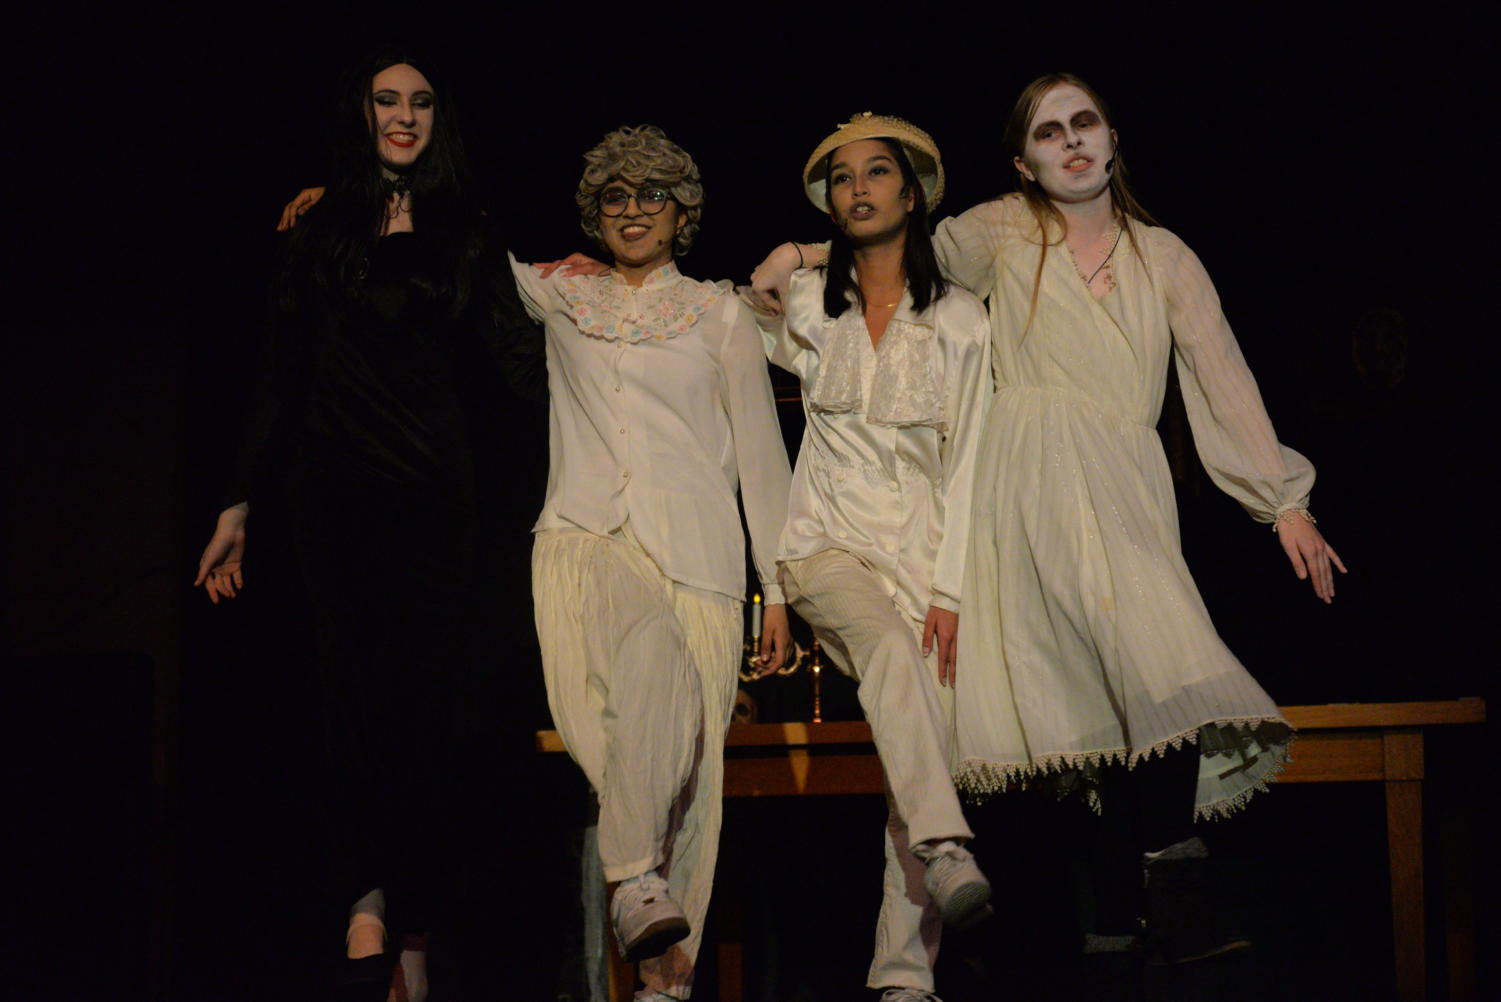 In+cased+you+missed+the+shows%3A+Addams+Family+musical+photos